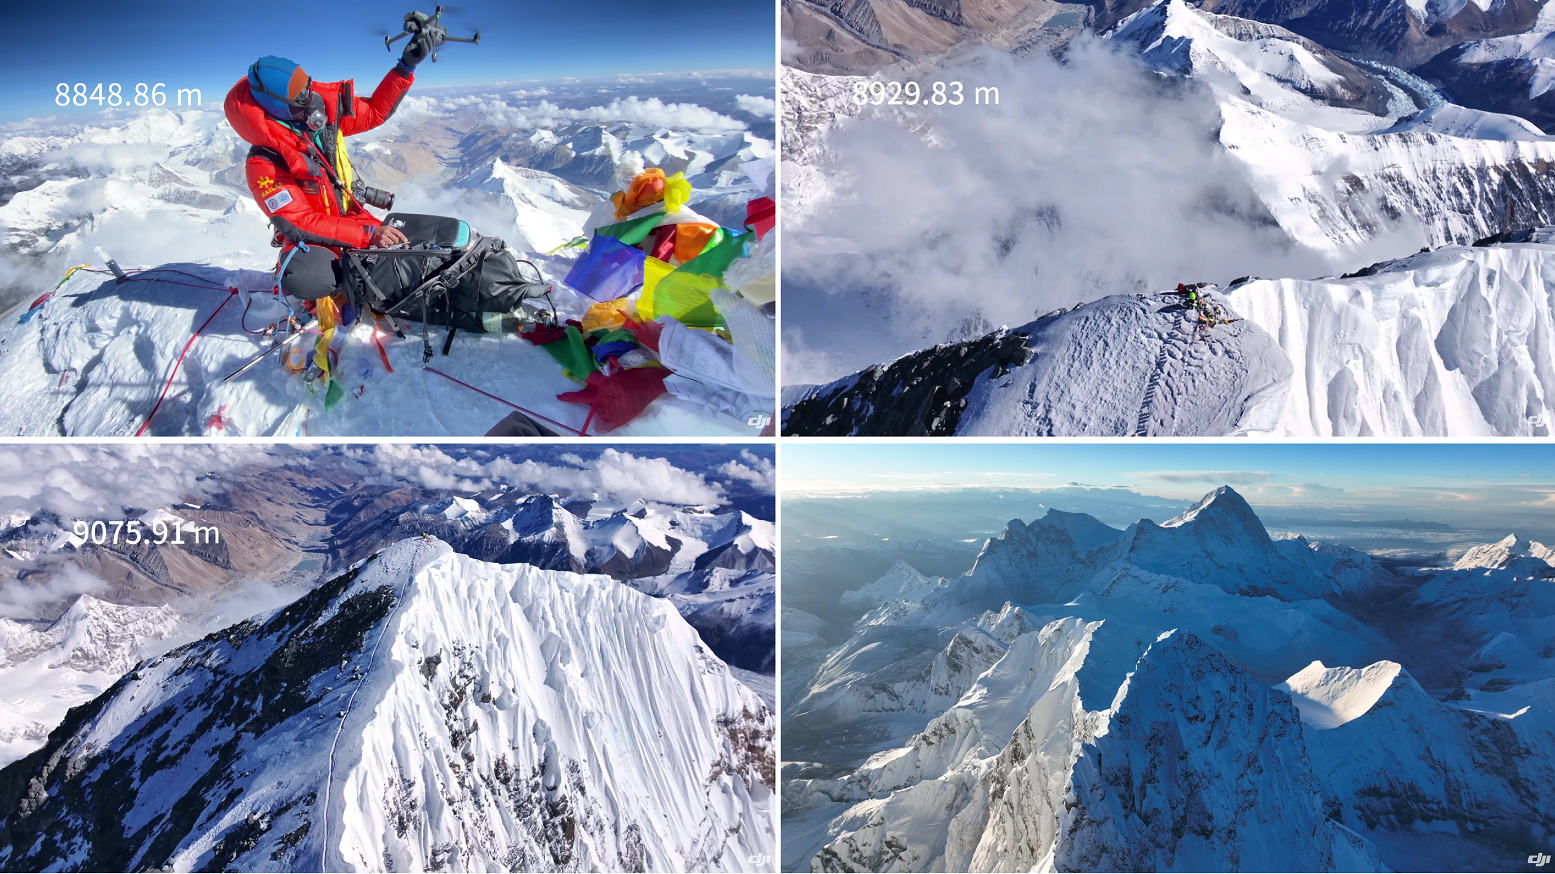 DJI Mavic 3 captures spectacular video from an altitude of 9,233 meters